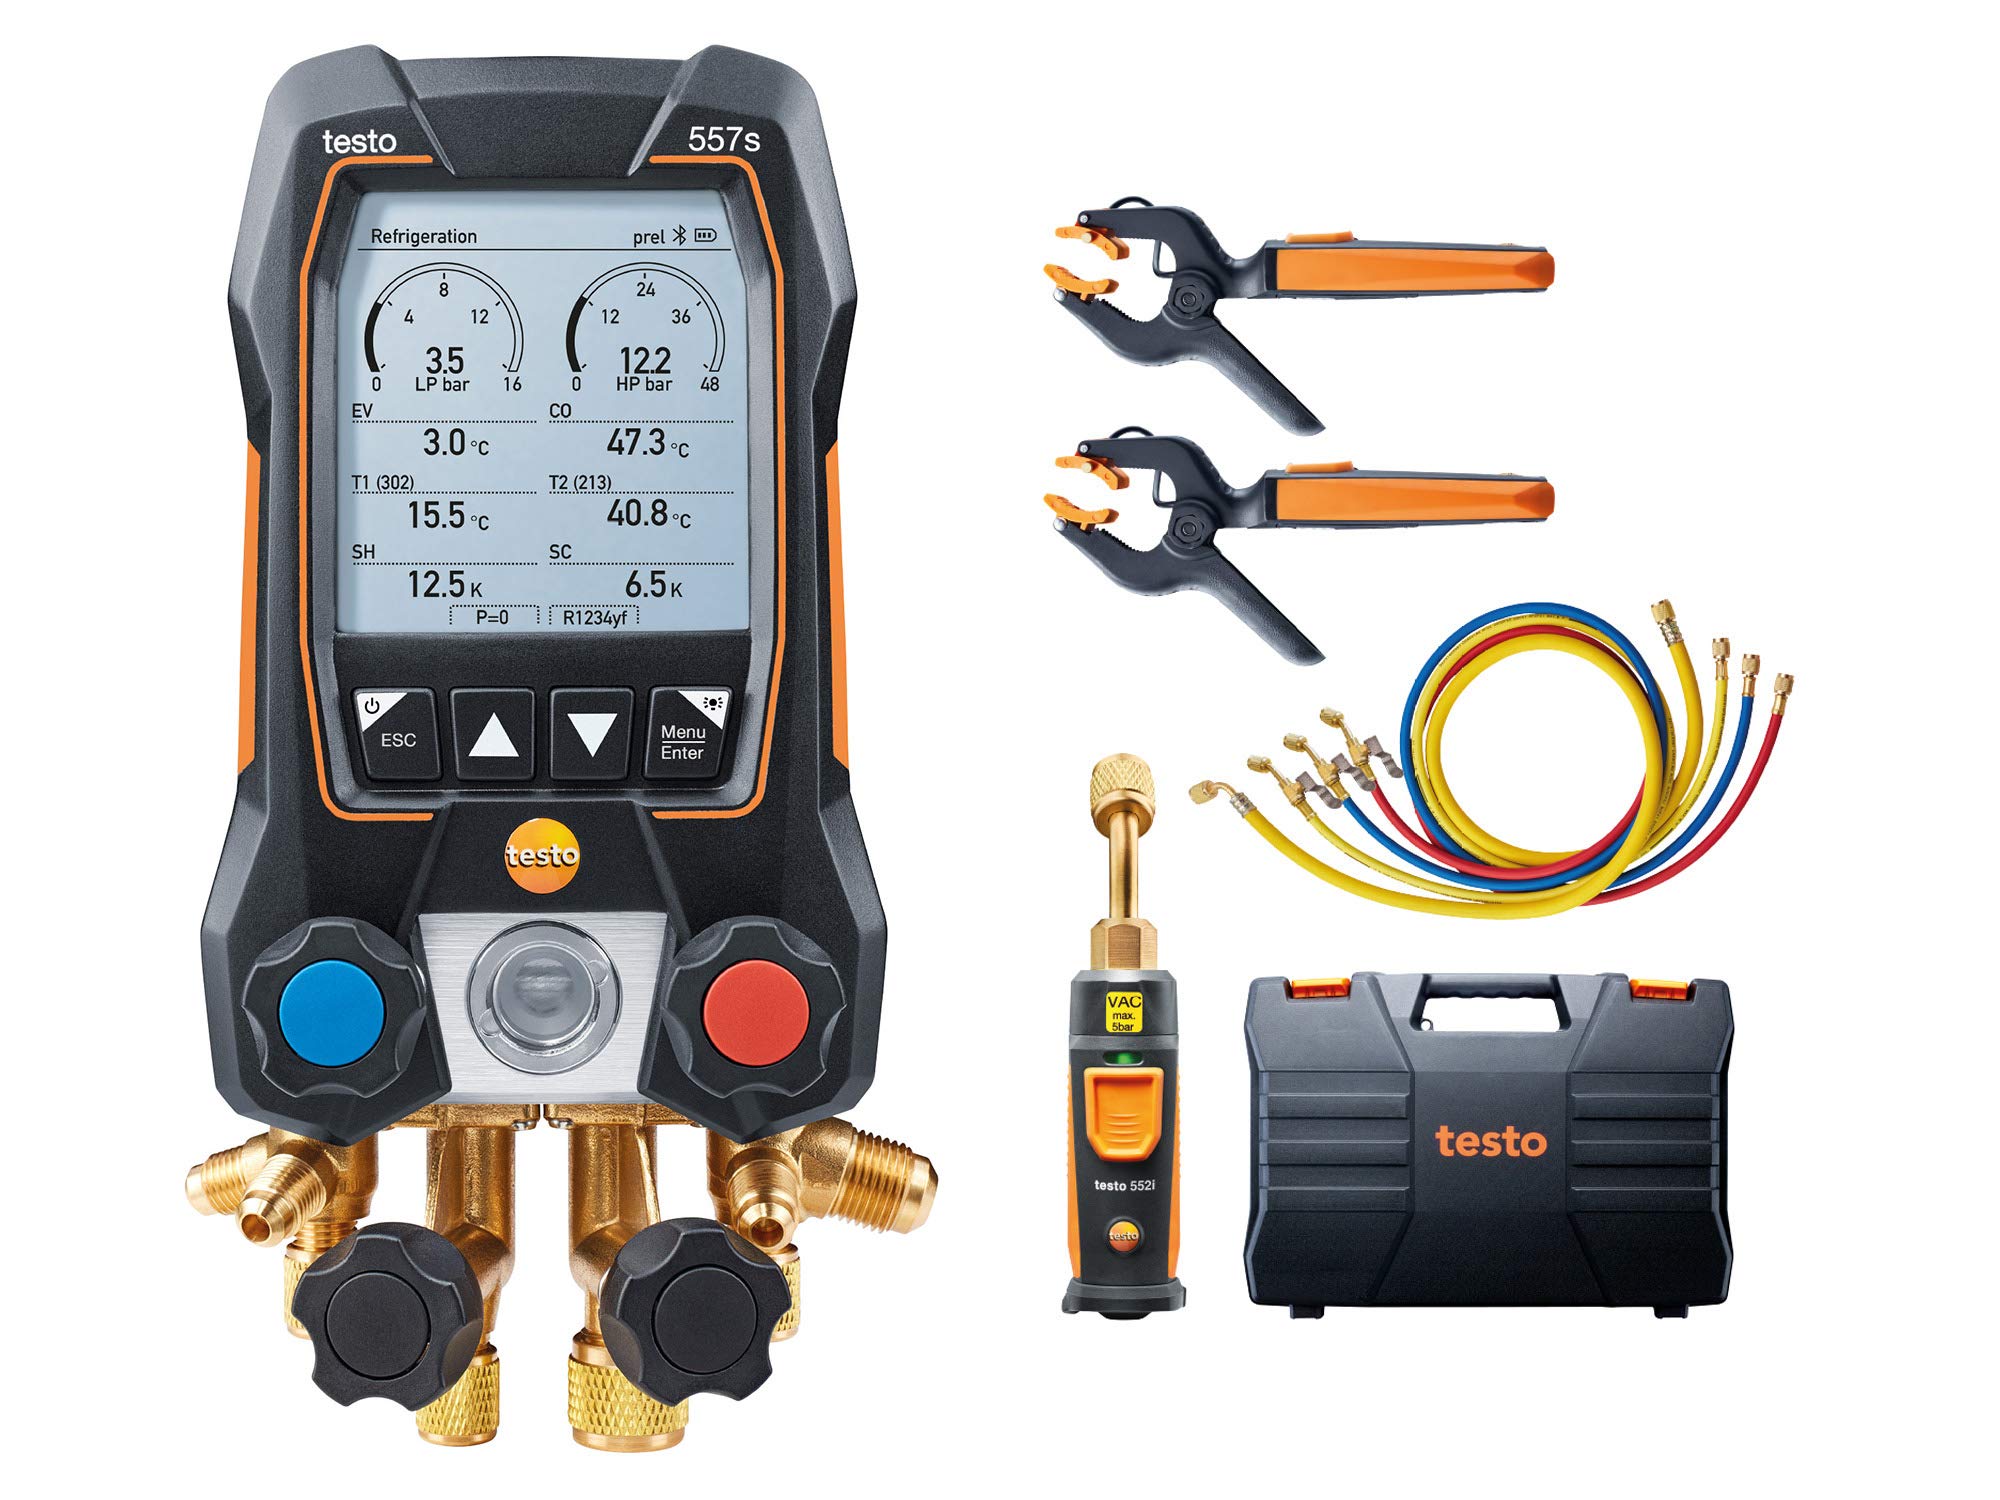 Testo 557s Kit I App Operated Digital Manifold, 2 x  115i Pipe Clamp Thermometer, 1 x  552i Micron Gauge, 4 x Hoses I for HVAC Systems – with Bluetooth